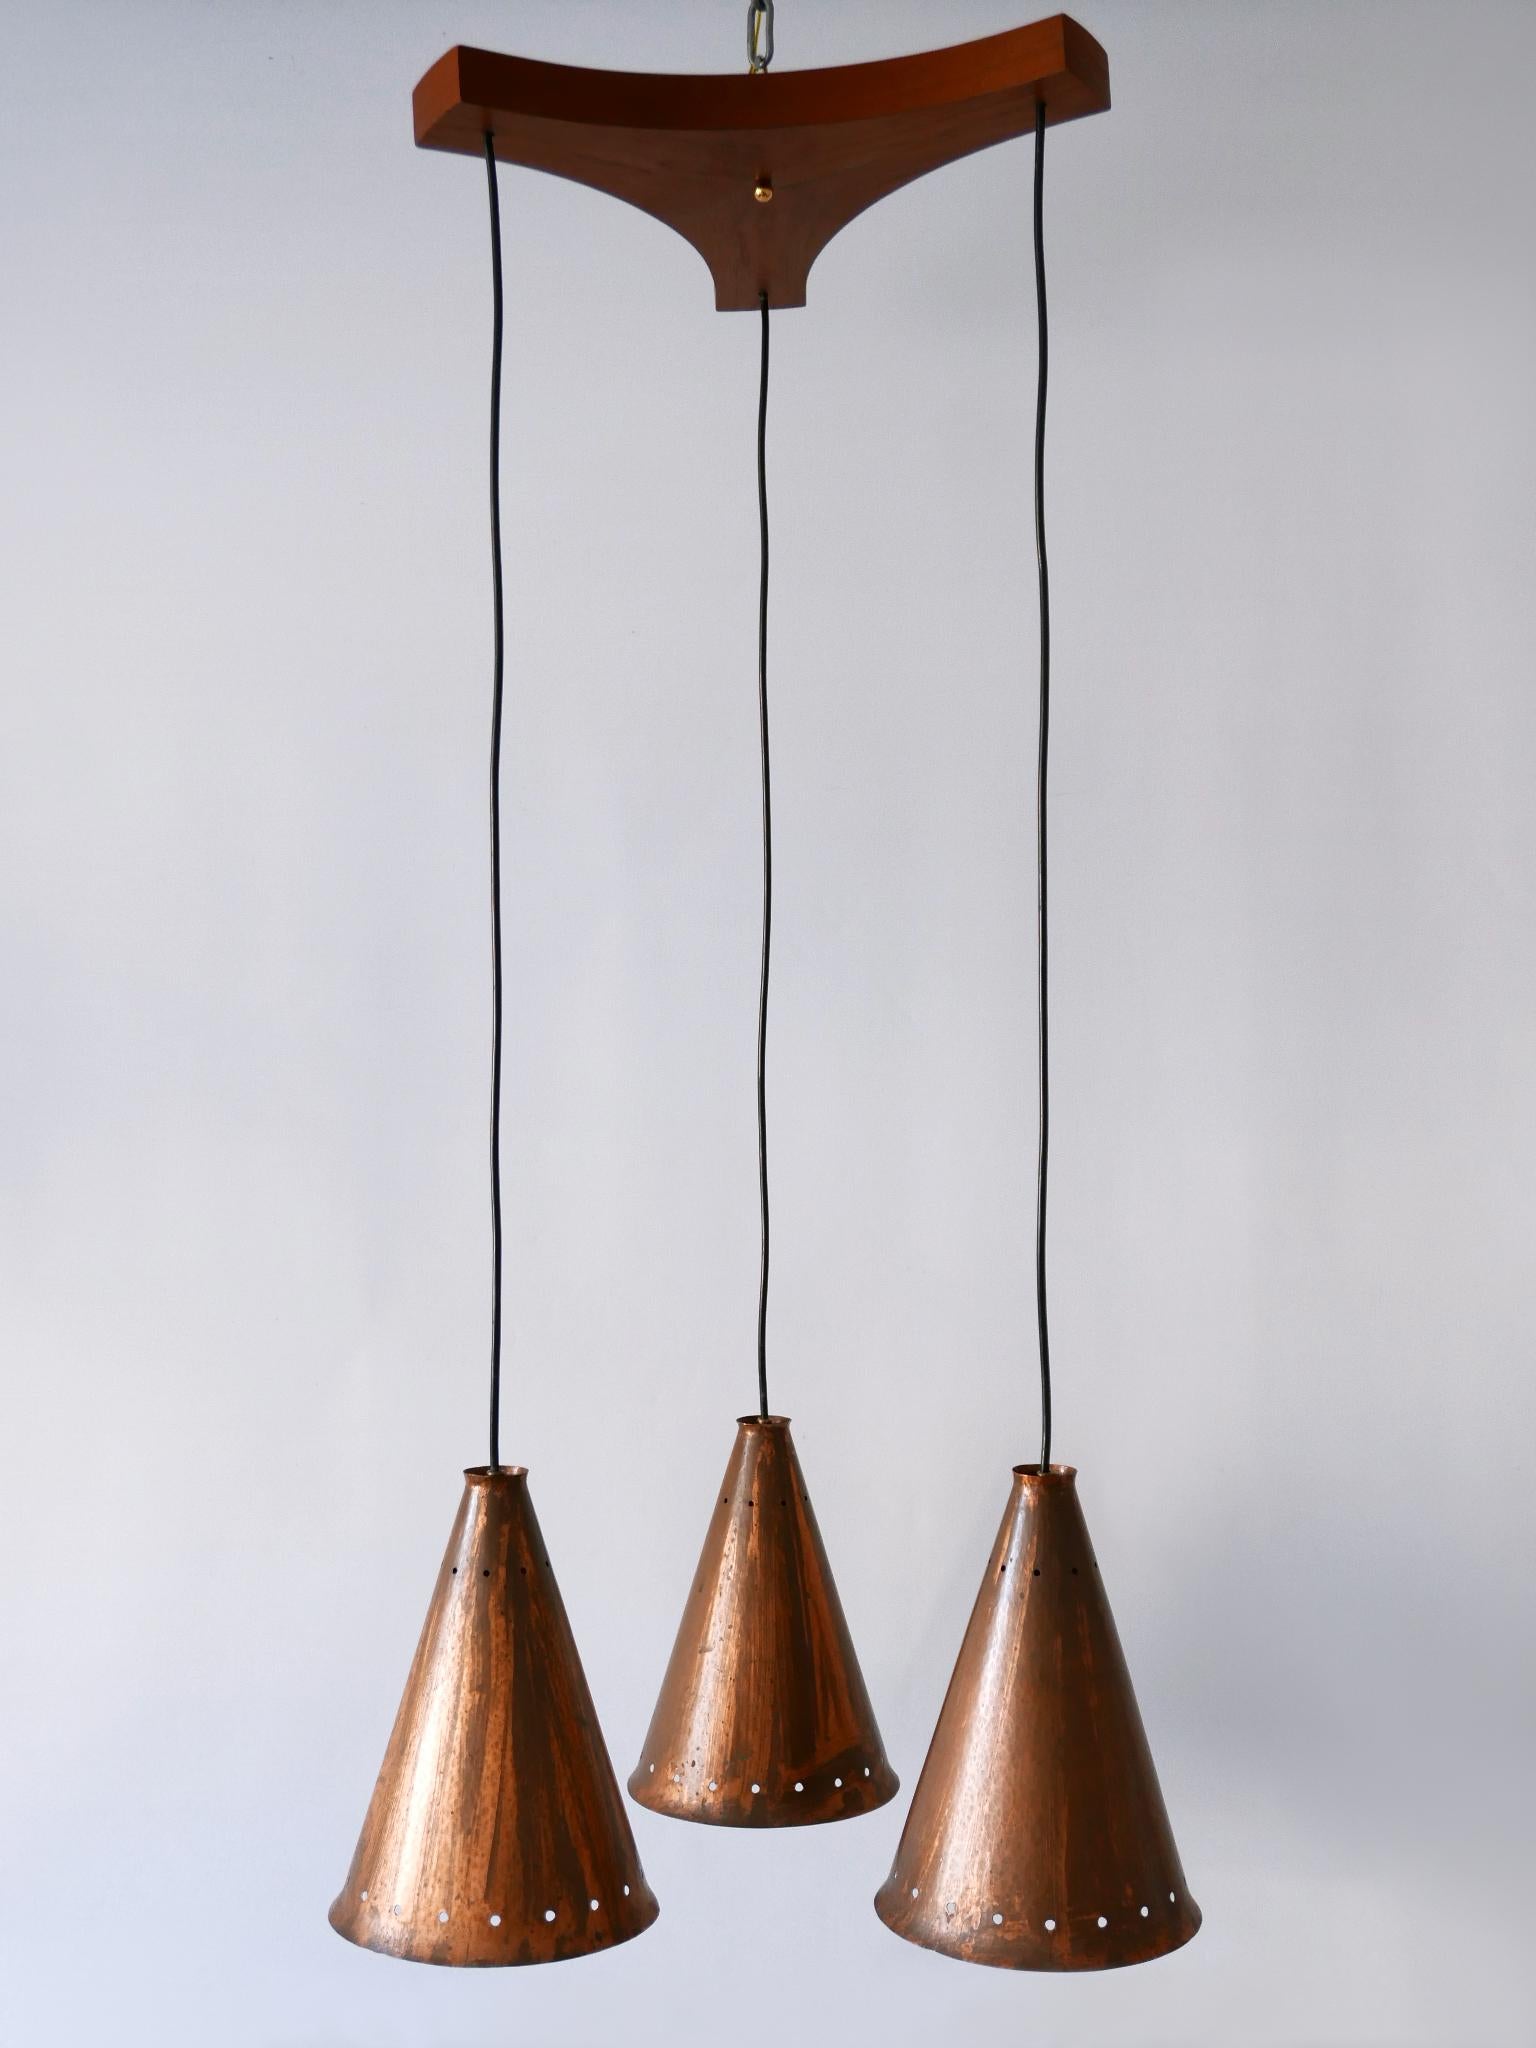 Extremely rare, lovely and highly decorative Mid-Century Modern three-armed cascading pendant lamp or chandelier. Designed and manufactured probably in Scandinavia, 1950s.

Executed in copper, the pendant lamp comes with 3 x E27 / E26 Edison screw